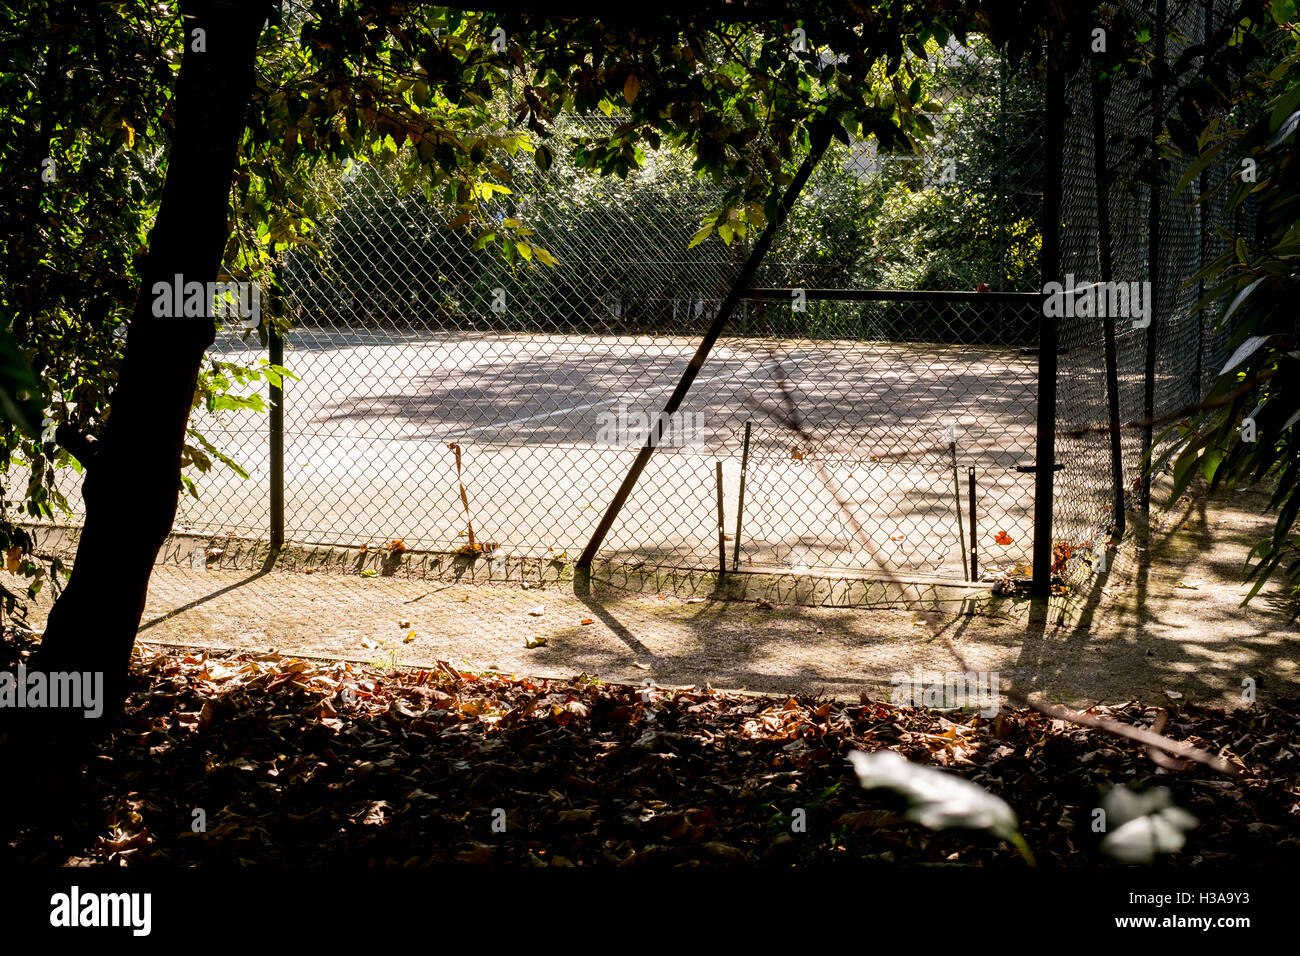 A hard tennis court bathed in morning sunlight Stock Photo